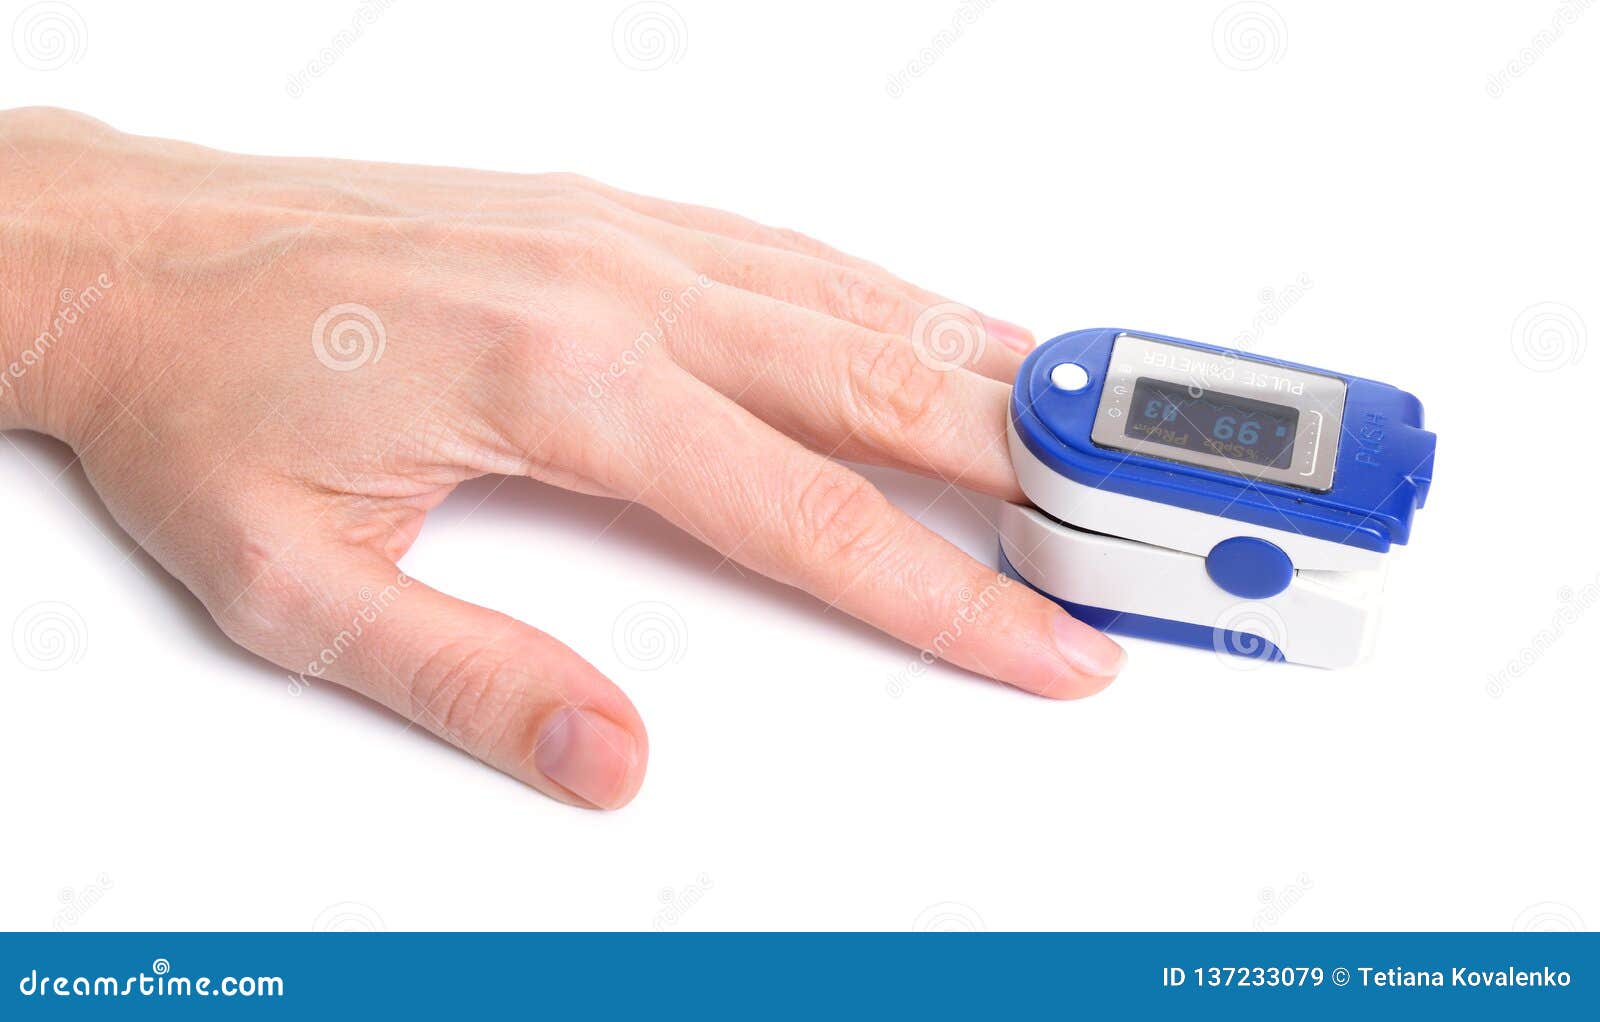 pulse oximeter with hand of patient  on white background